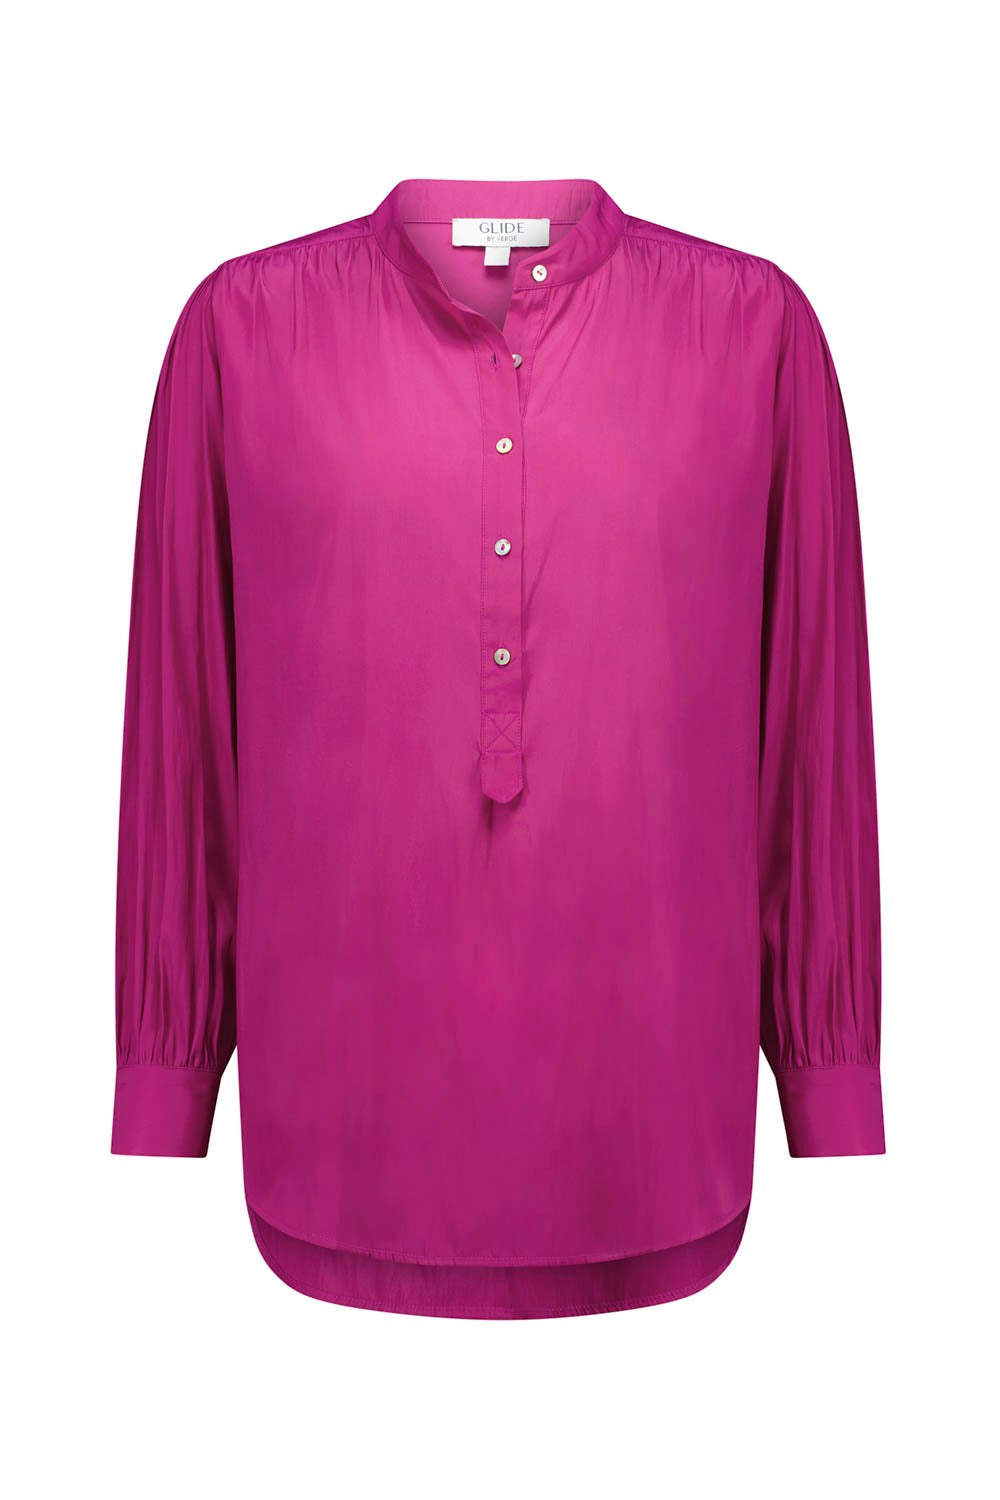 Glide by Verge - Seattle Shirt - Orchid - Shirt VERGE